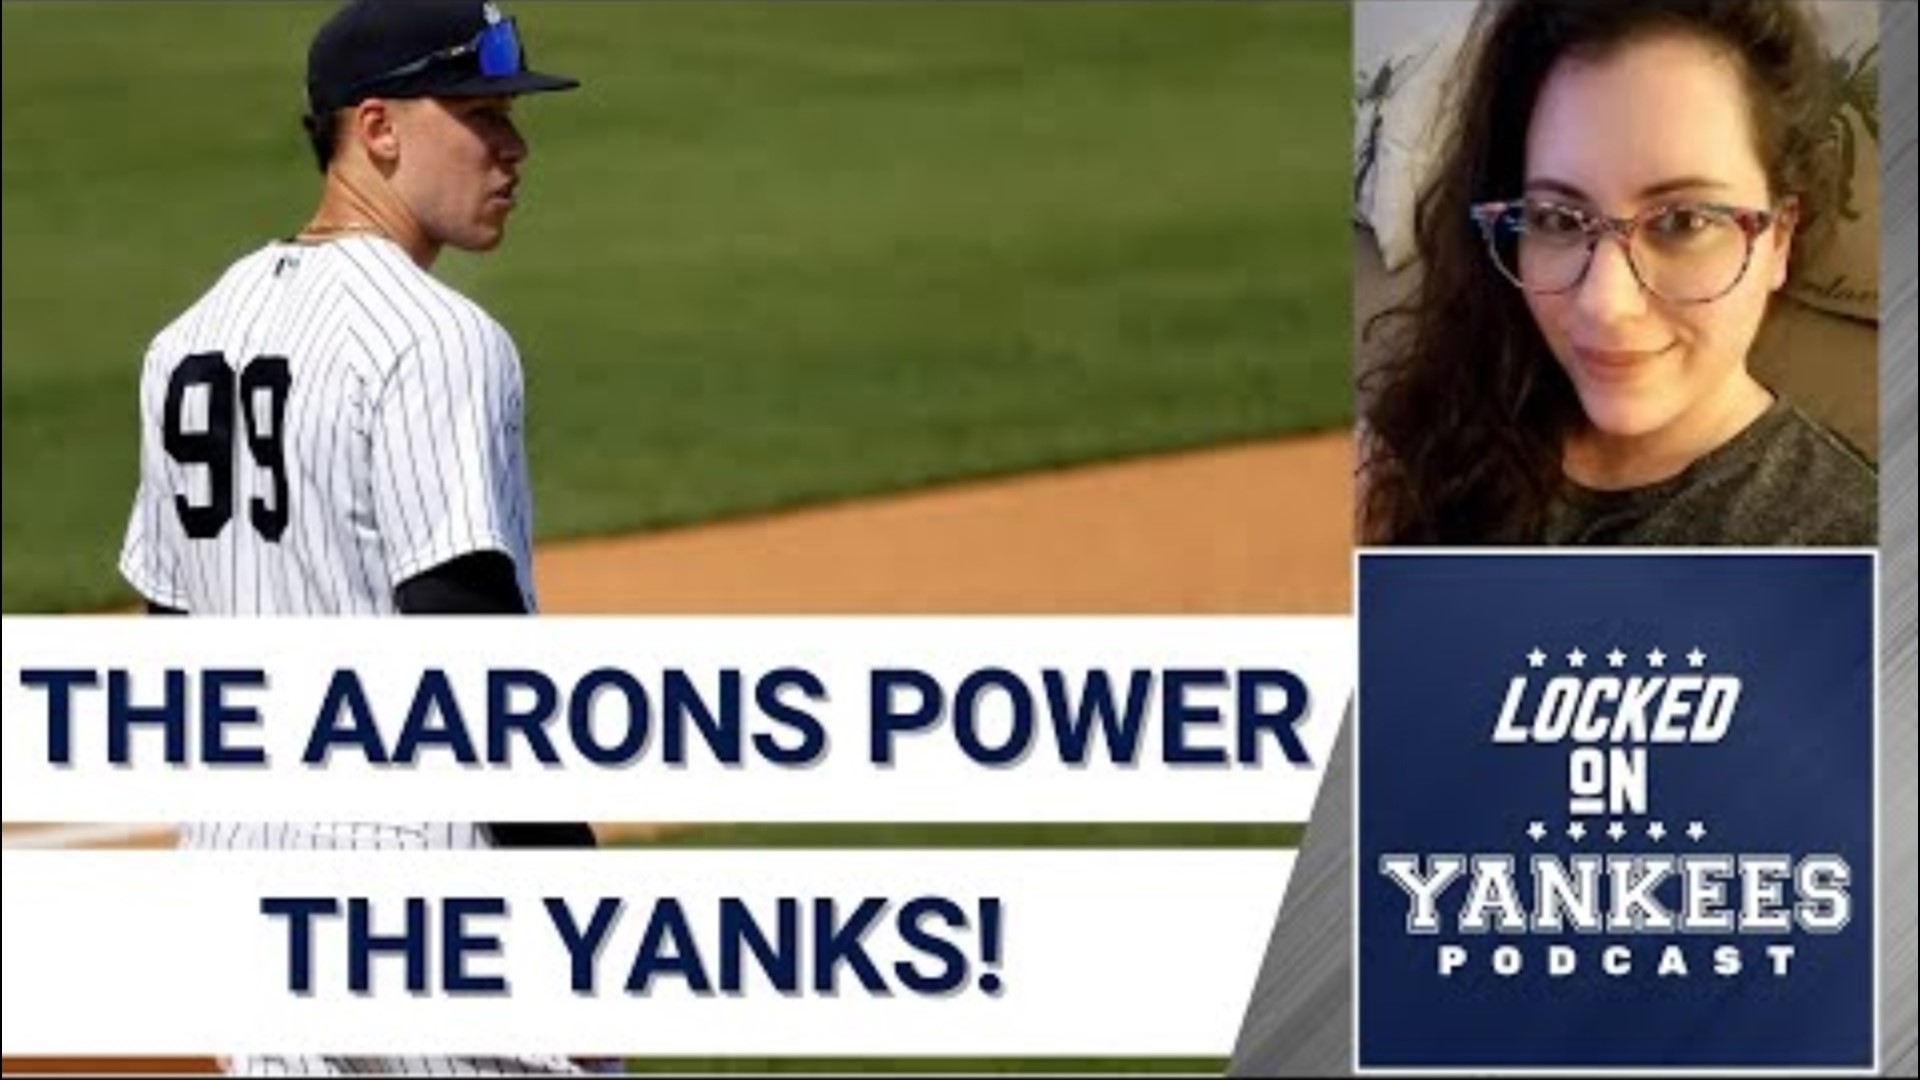 The Yankees win in exciting, comeback fashion 7-6 over the Astros, and Stacey talks all about it.